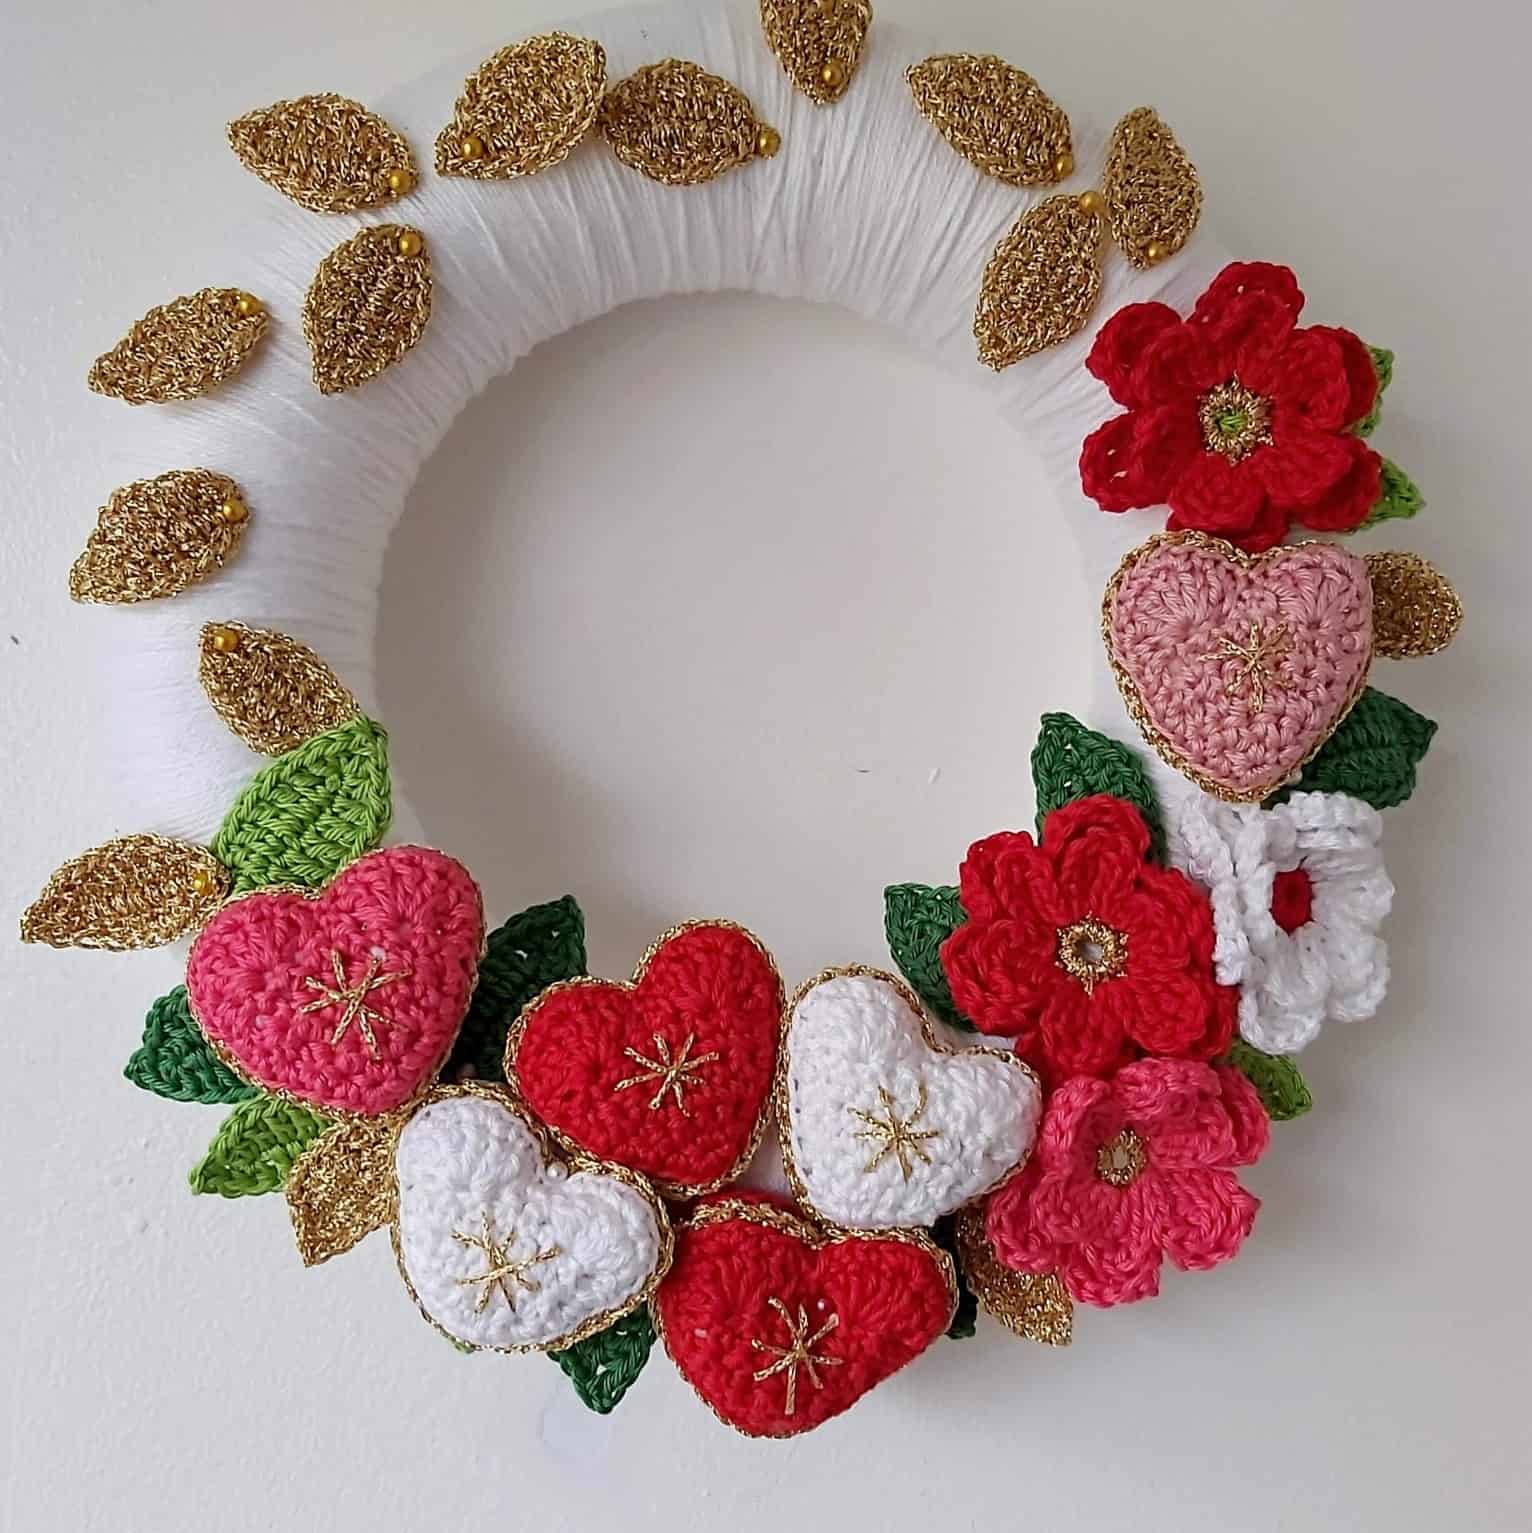 Crochet Christmas Wreath with Flowers and Hearts – Free Pattern